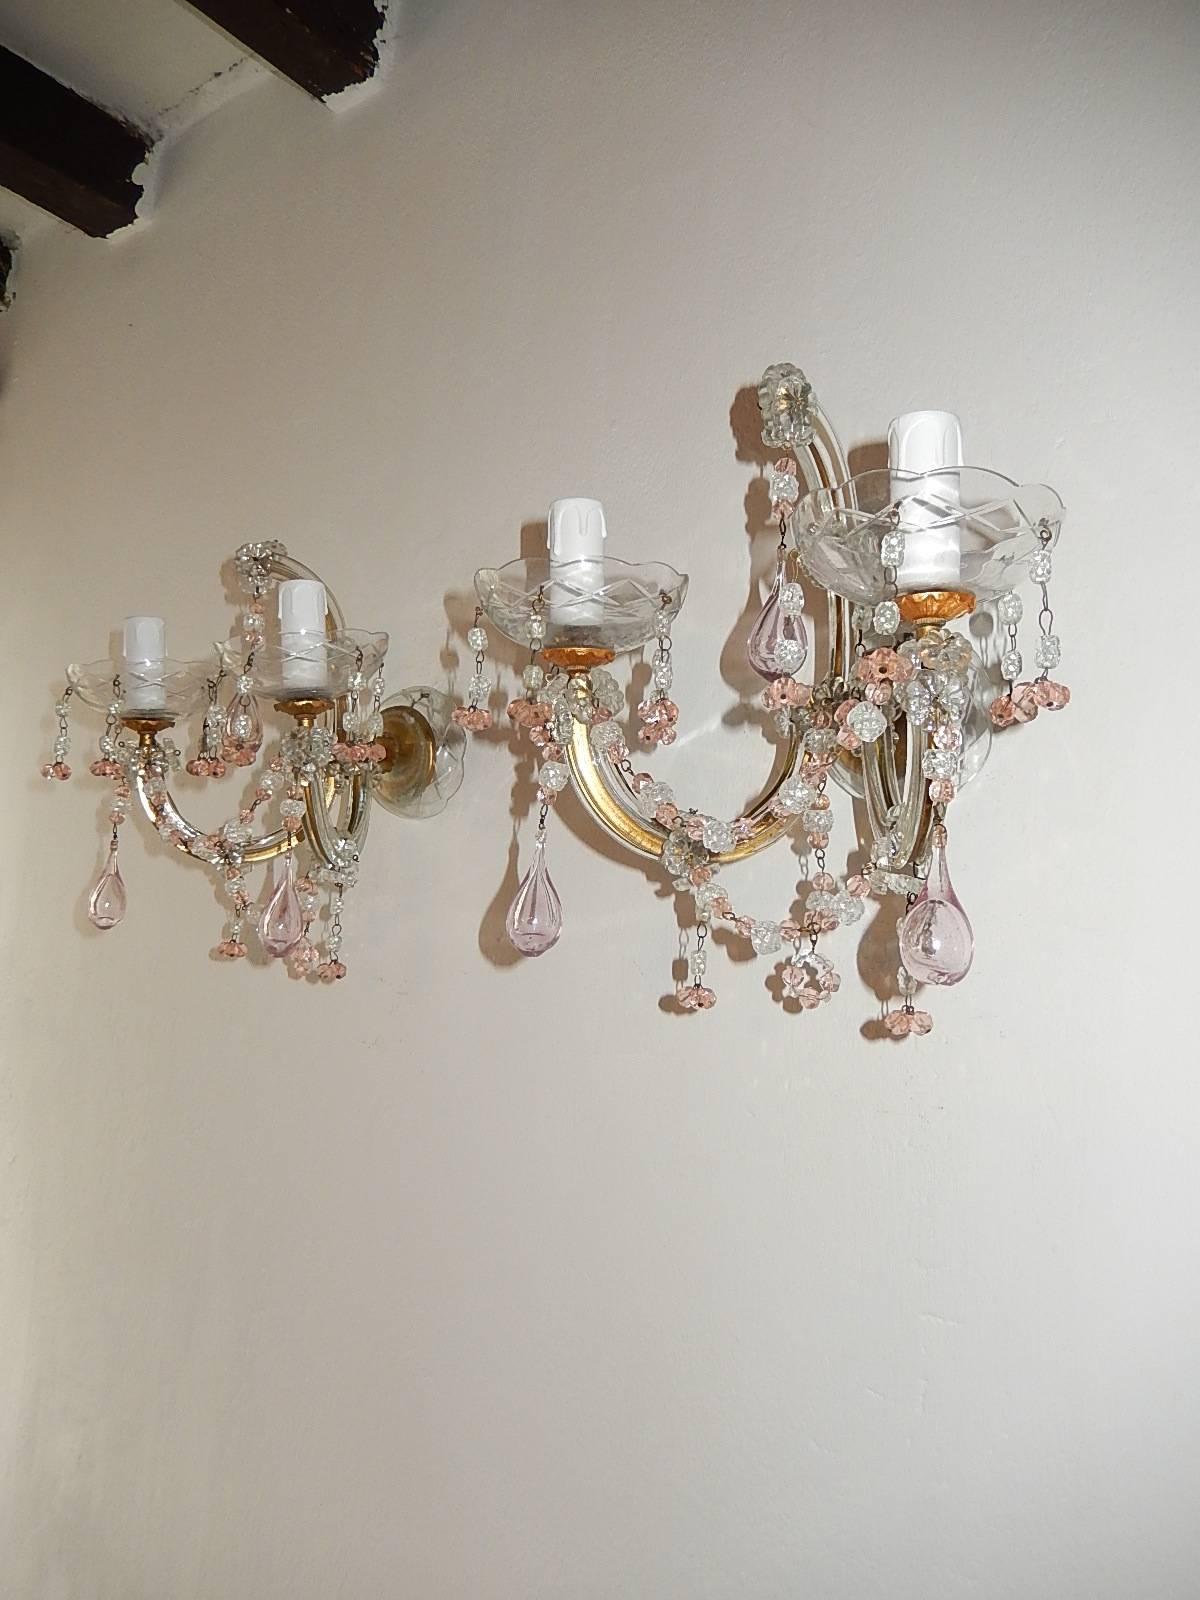 Housing two lights each. Rewired and ready to hang. Gilt metal arms with glass covering. Crystal bobeches with pink and white beads. Pink Blown Murano drops and swags of beads throughout. Free priority shipping from Italy.